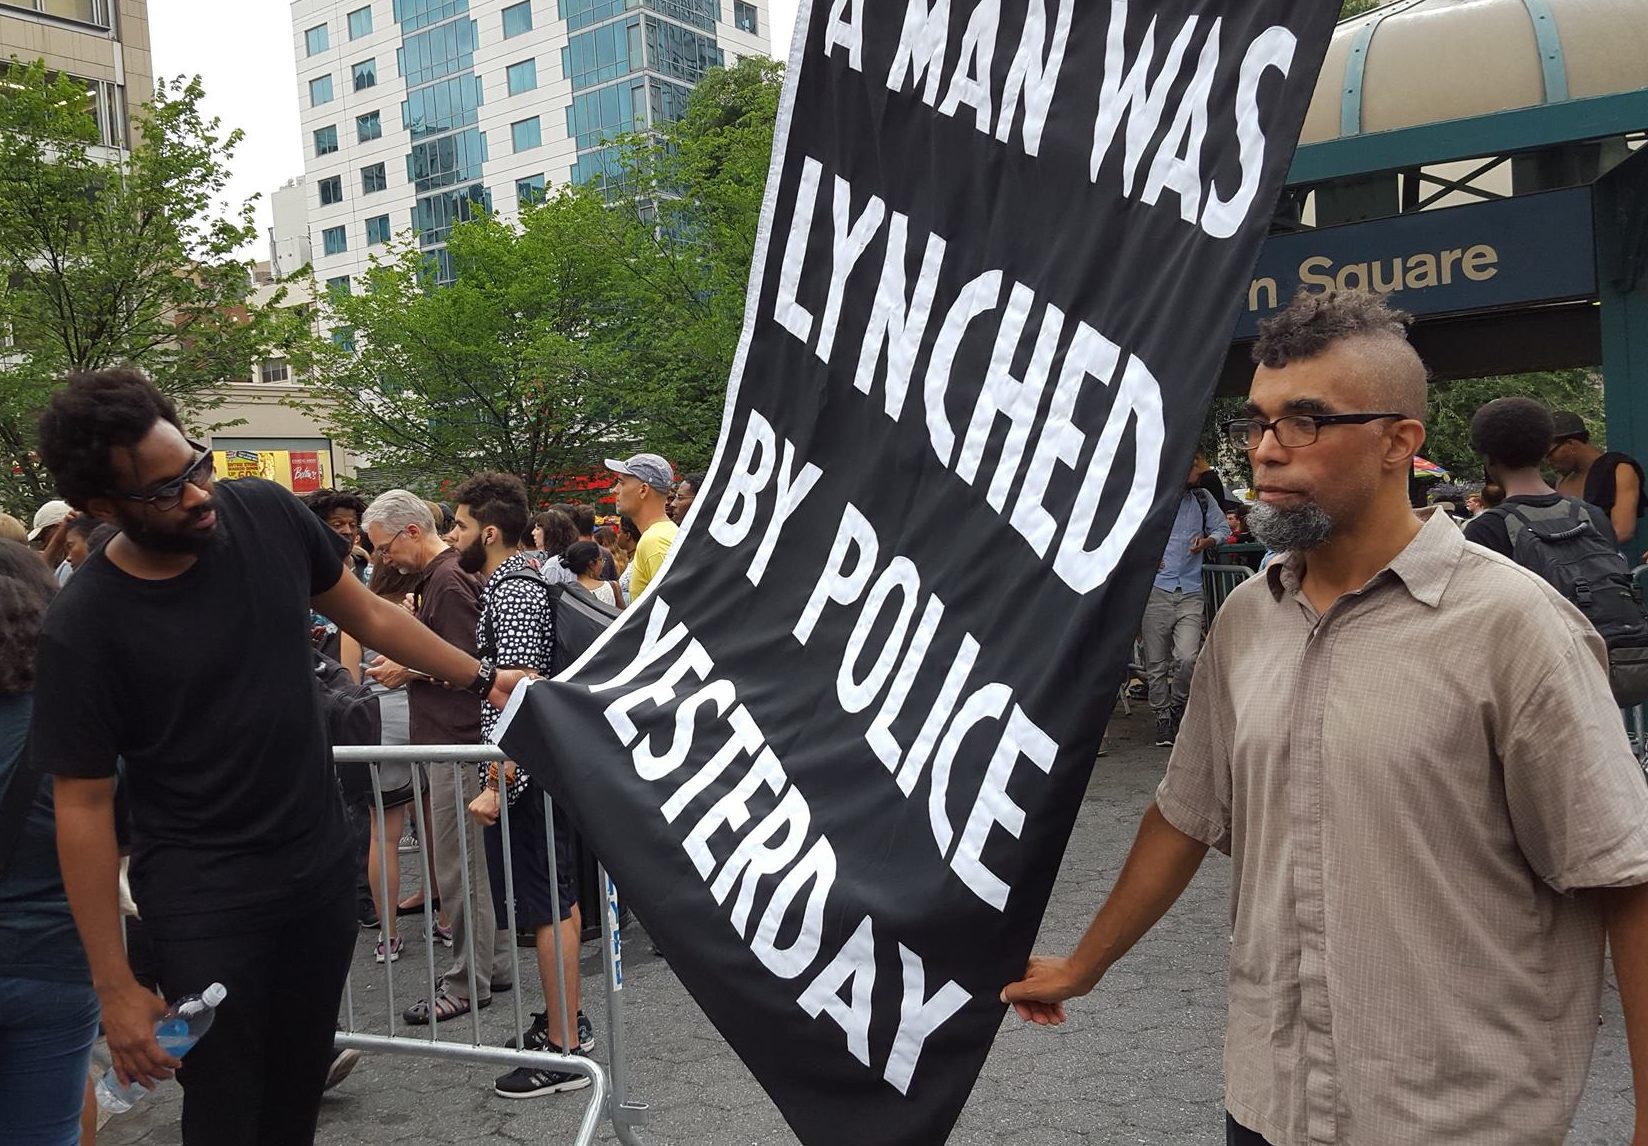 Dread Scott with flag, A Man Was Lynched By Police Yesterday. Courtesy of Connie Julian via Facebook.